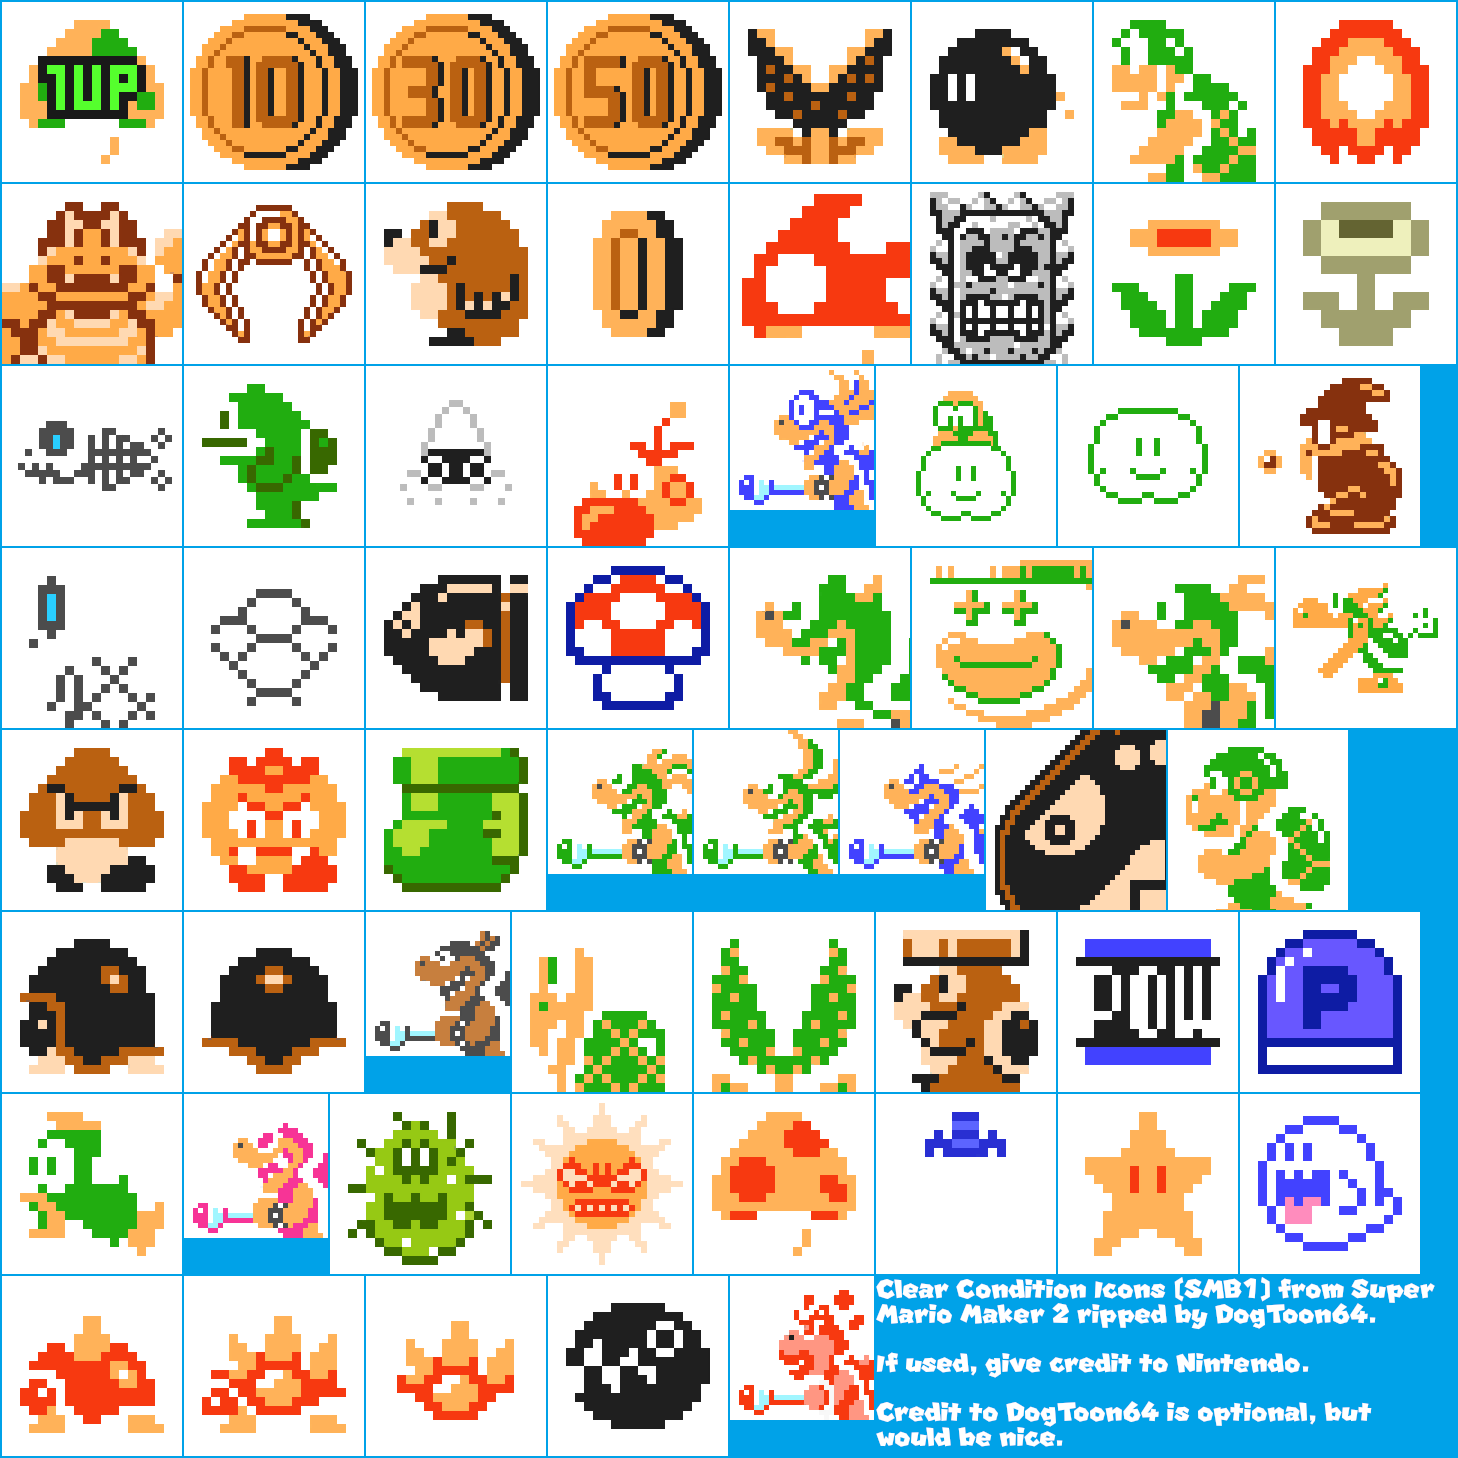 Clear Condition Icons (SMB1)